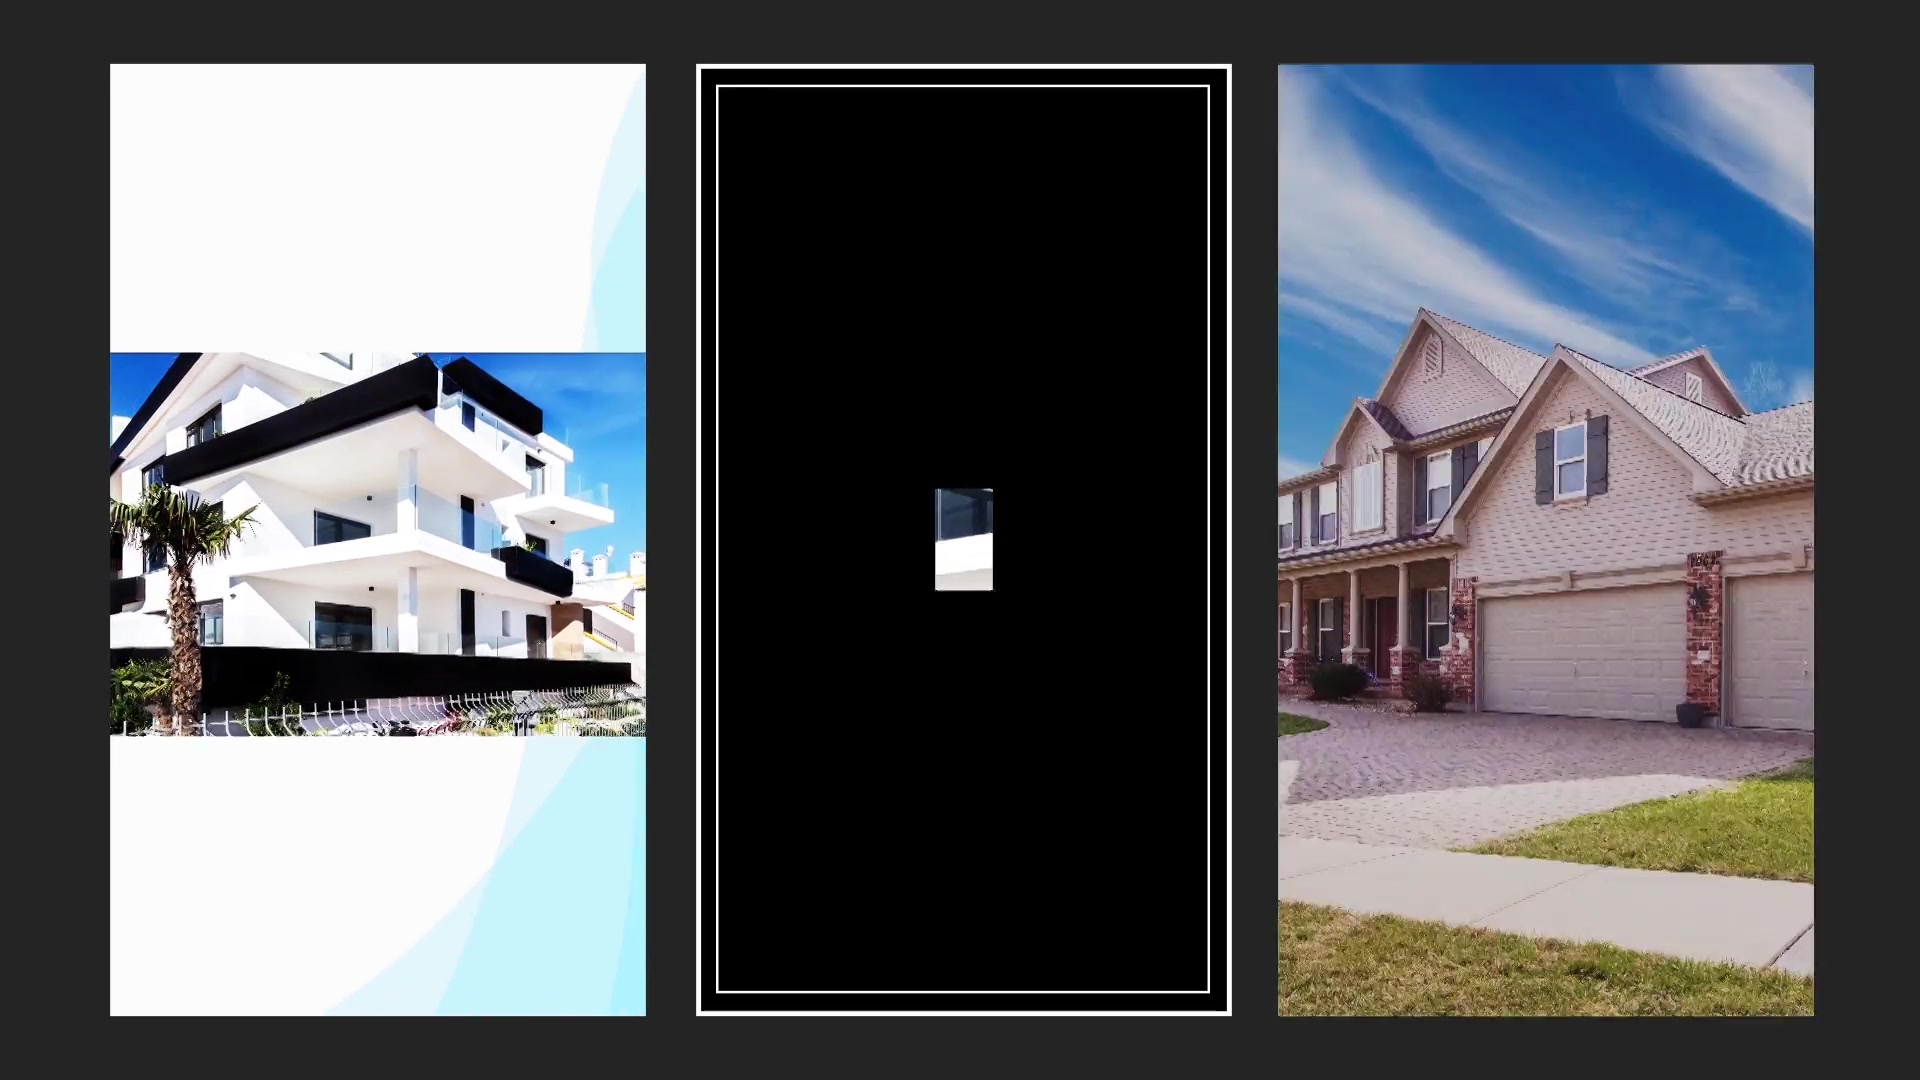 Real Estate Instagram Stories - Download Videohive 23403280